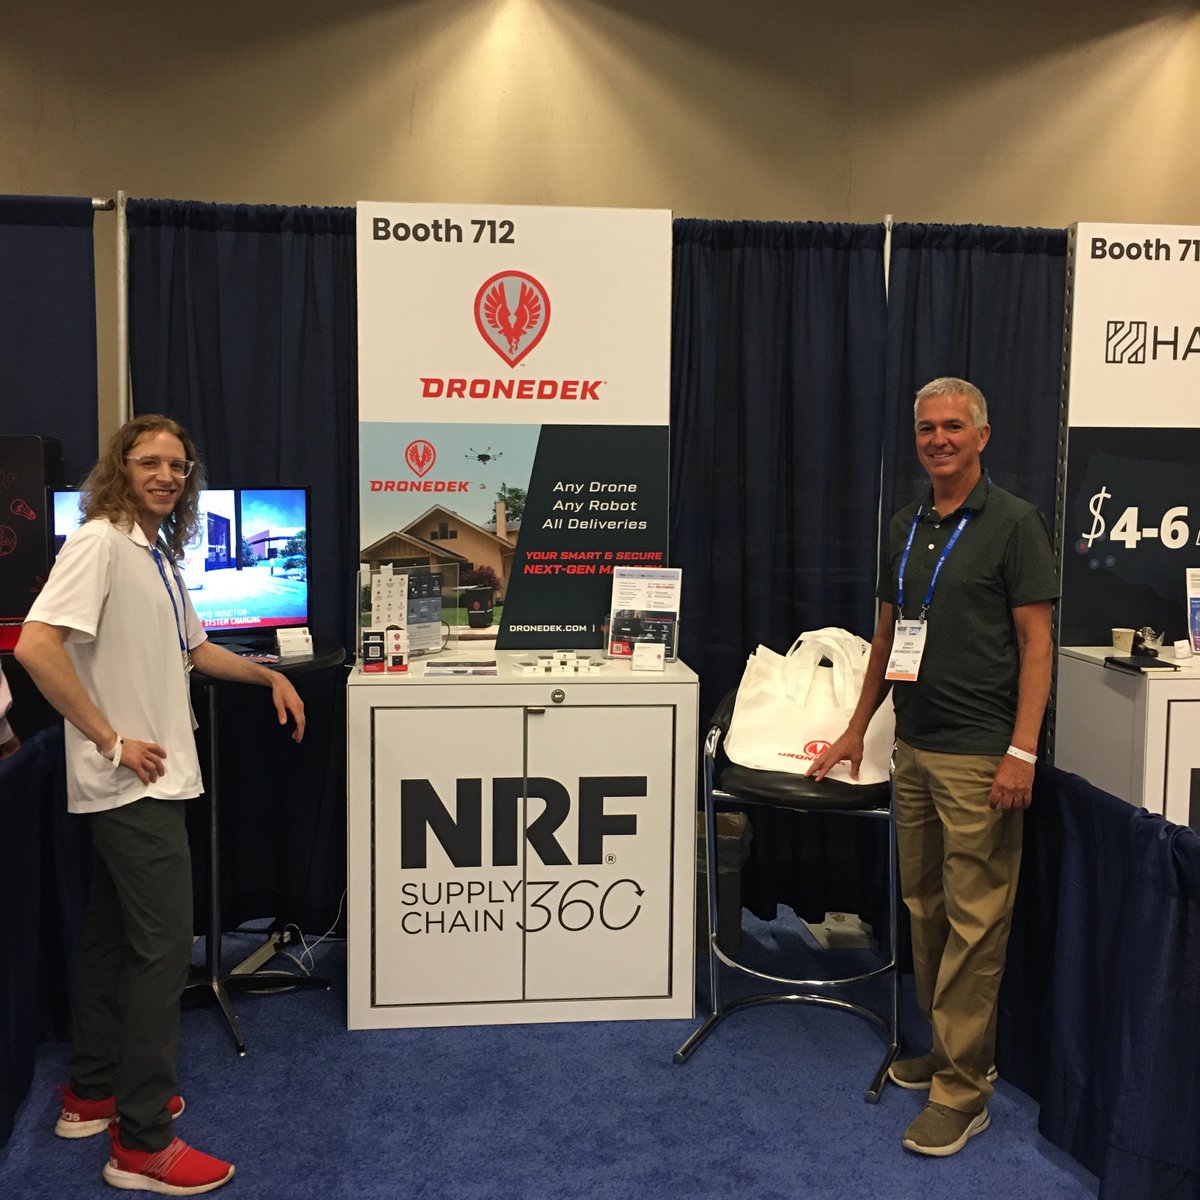 Missed the Dronedek team on Day 1? We’re going to be here at #NRFSupplyChain360 in #Cleveland tomorrow too!

See you at booth #712 in the startup zone 🦅